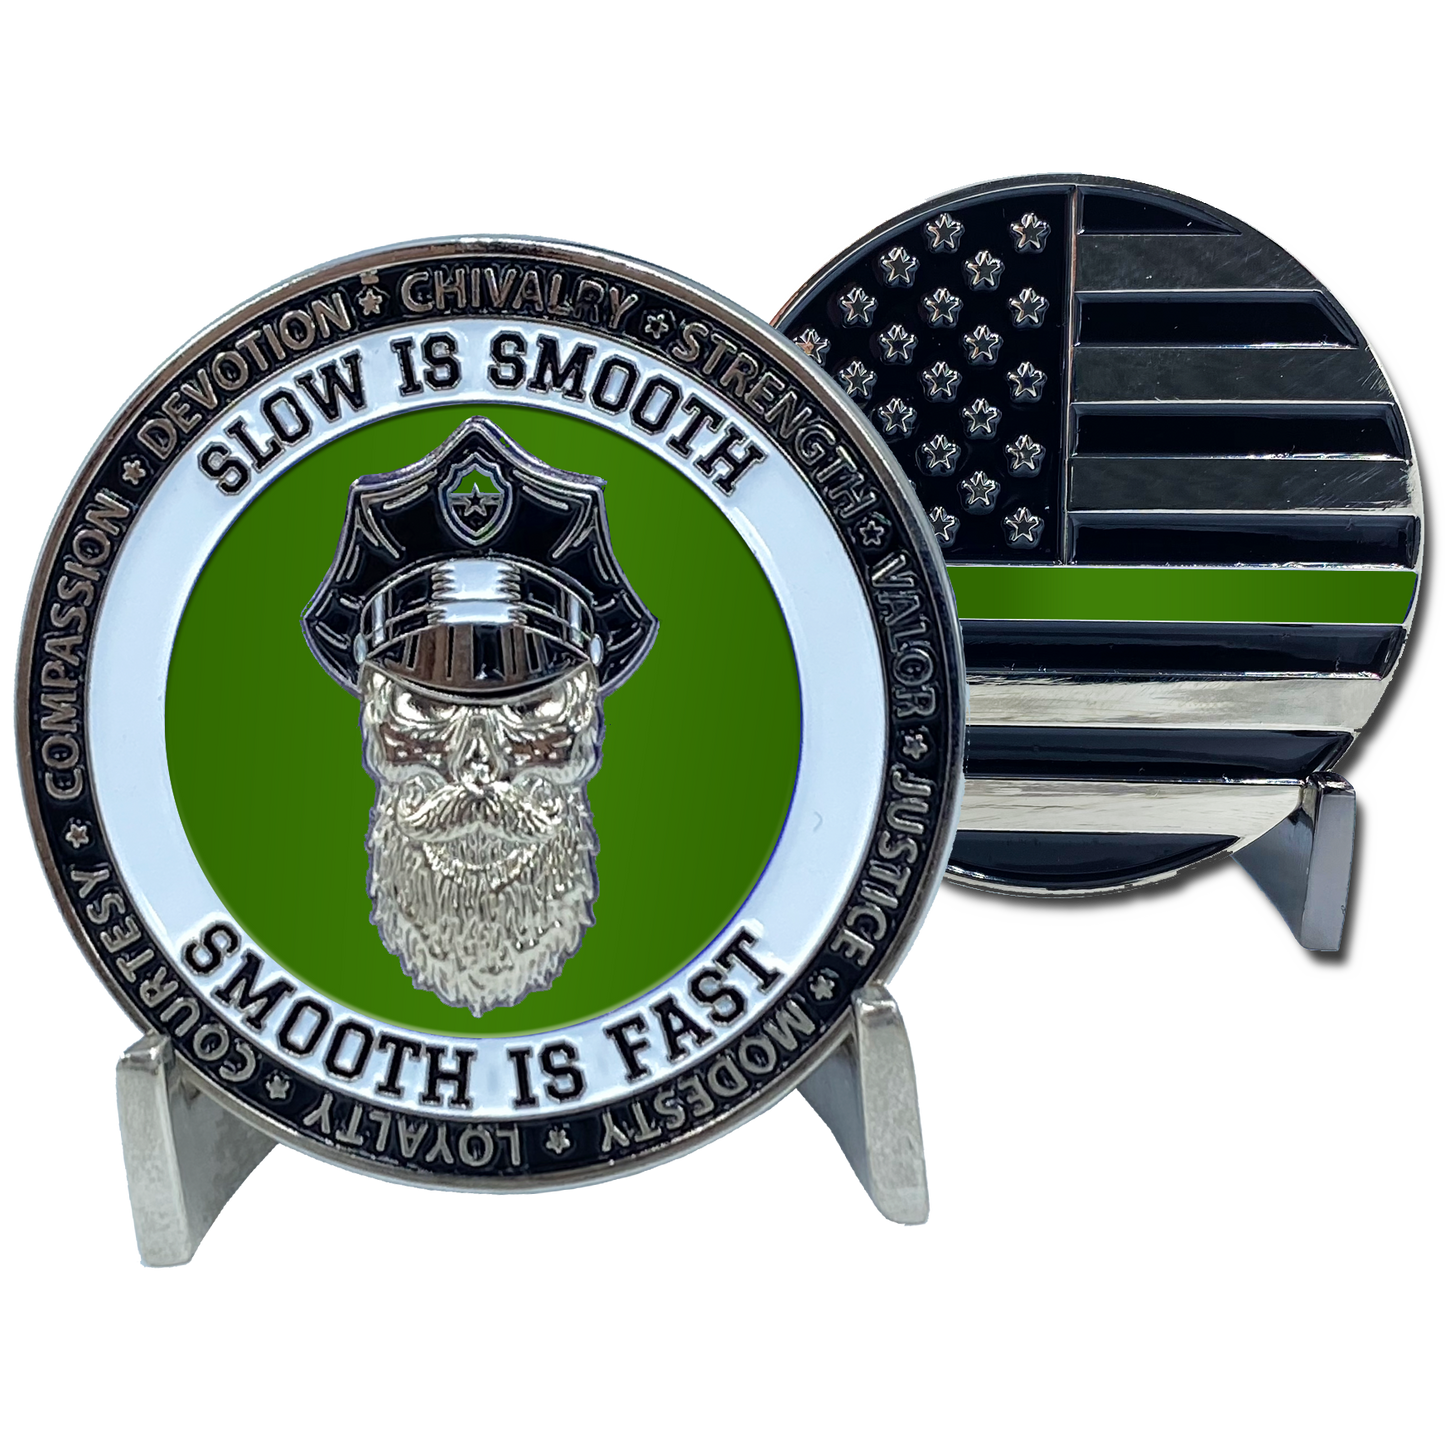 DL4-11 Thin Green Line Challenge Coin SLOW IS SMOOTH, SMOOTH IS FAST Beard Gang Skull Police Deputy Sheriff Border Patrol Agent Back the Blue